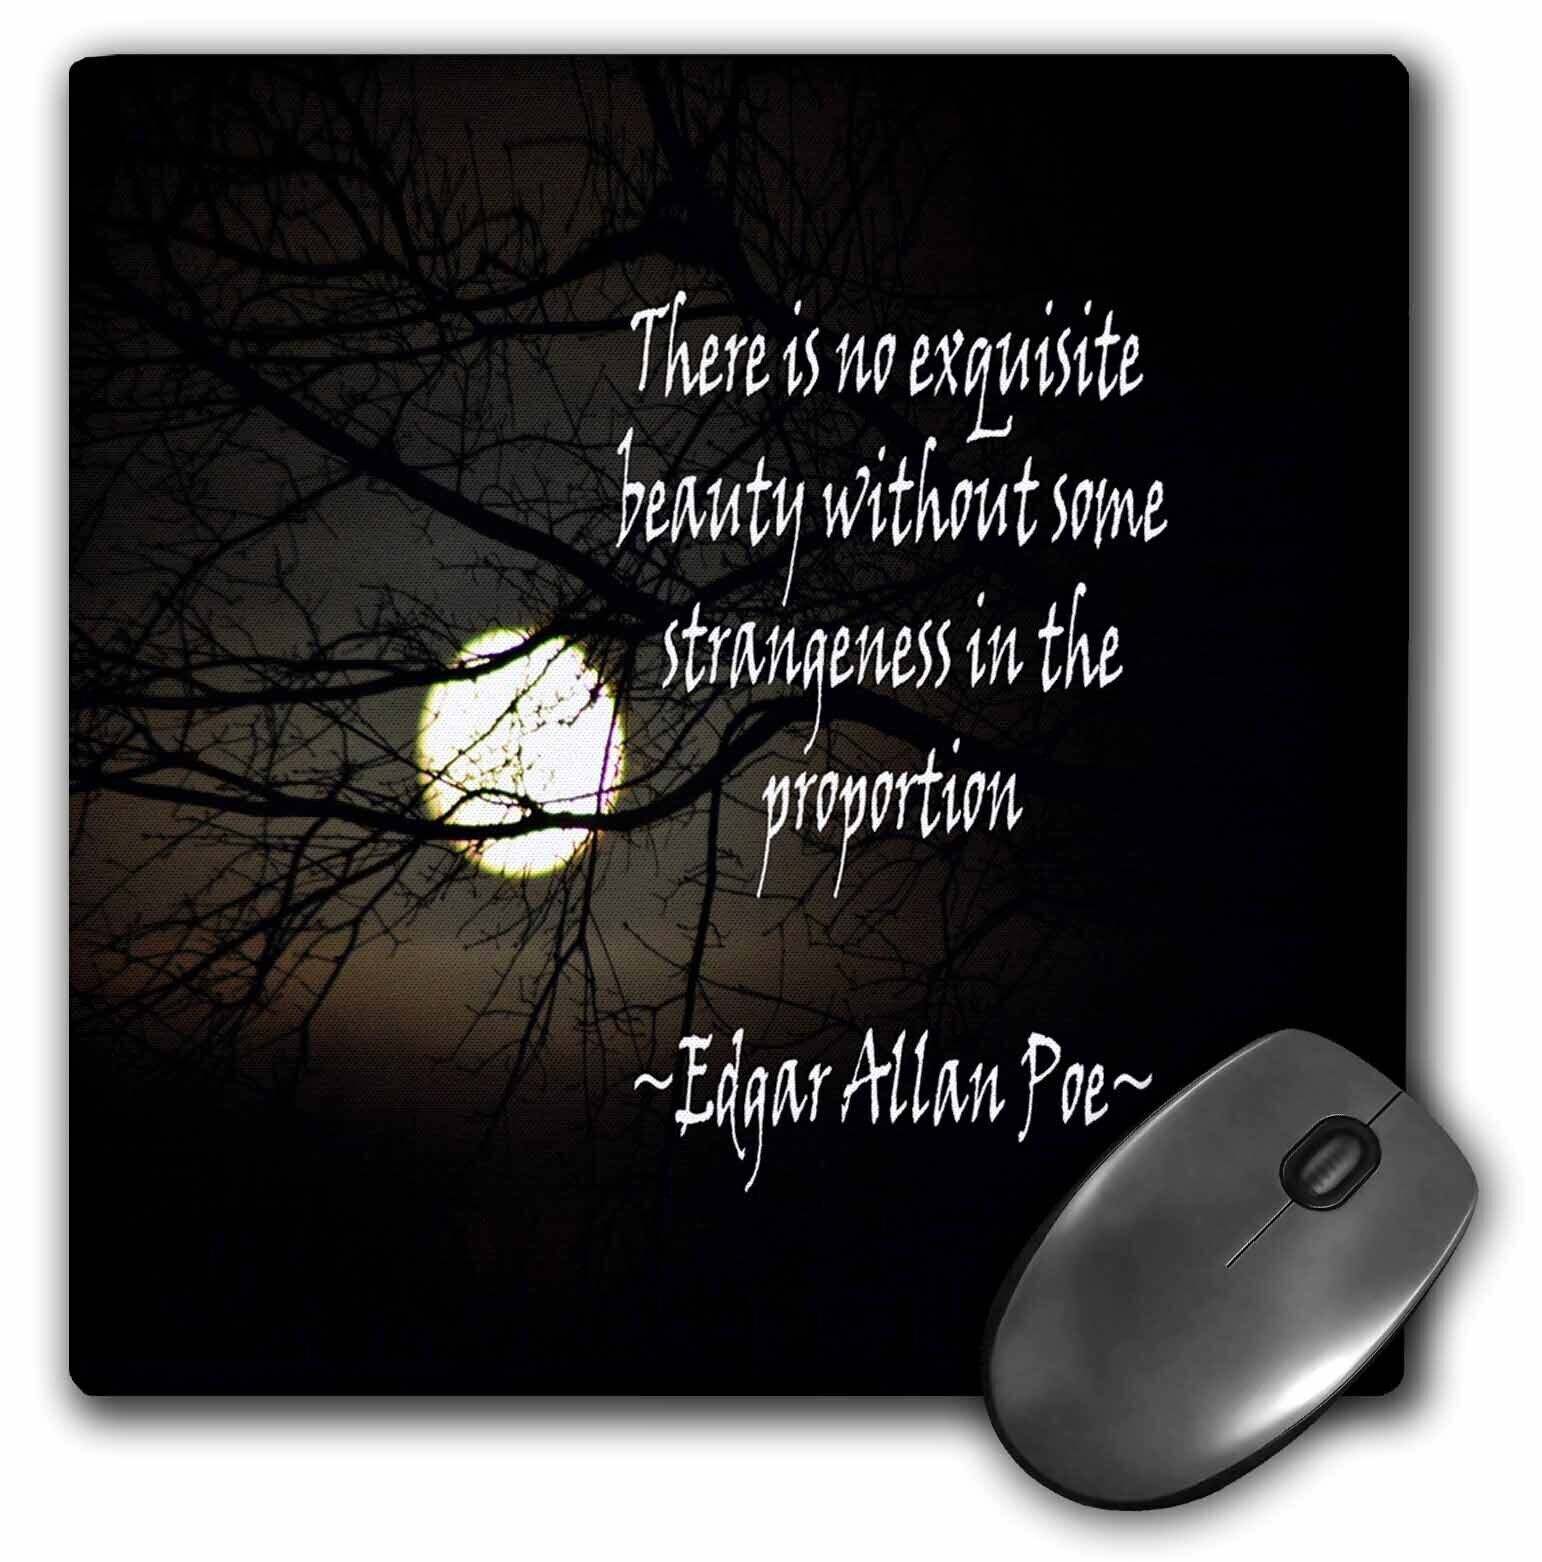 3dRose Edgar Allan Poe No Exquisite is a photo of the moon with a quote MousePad